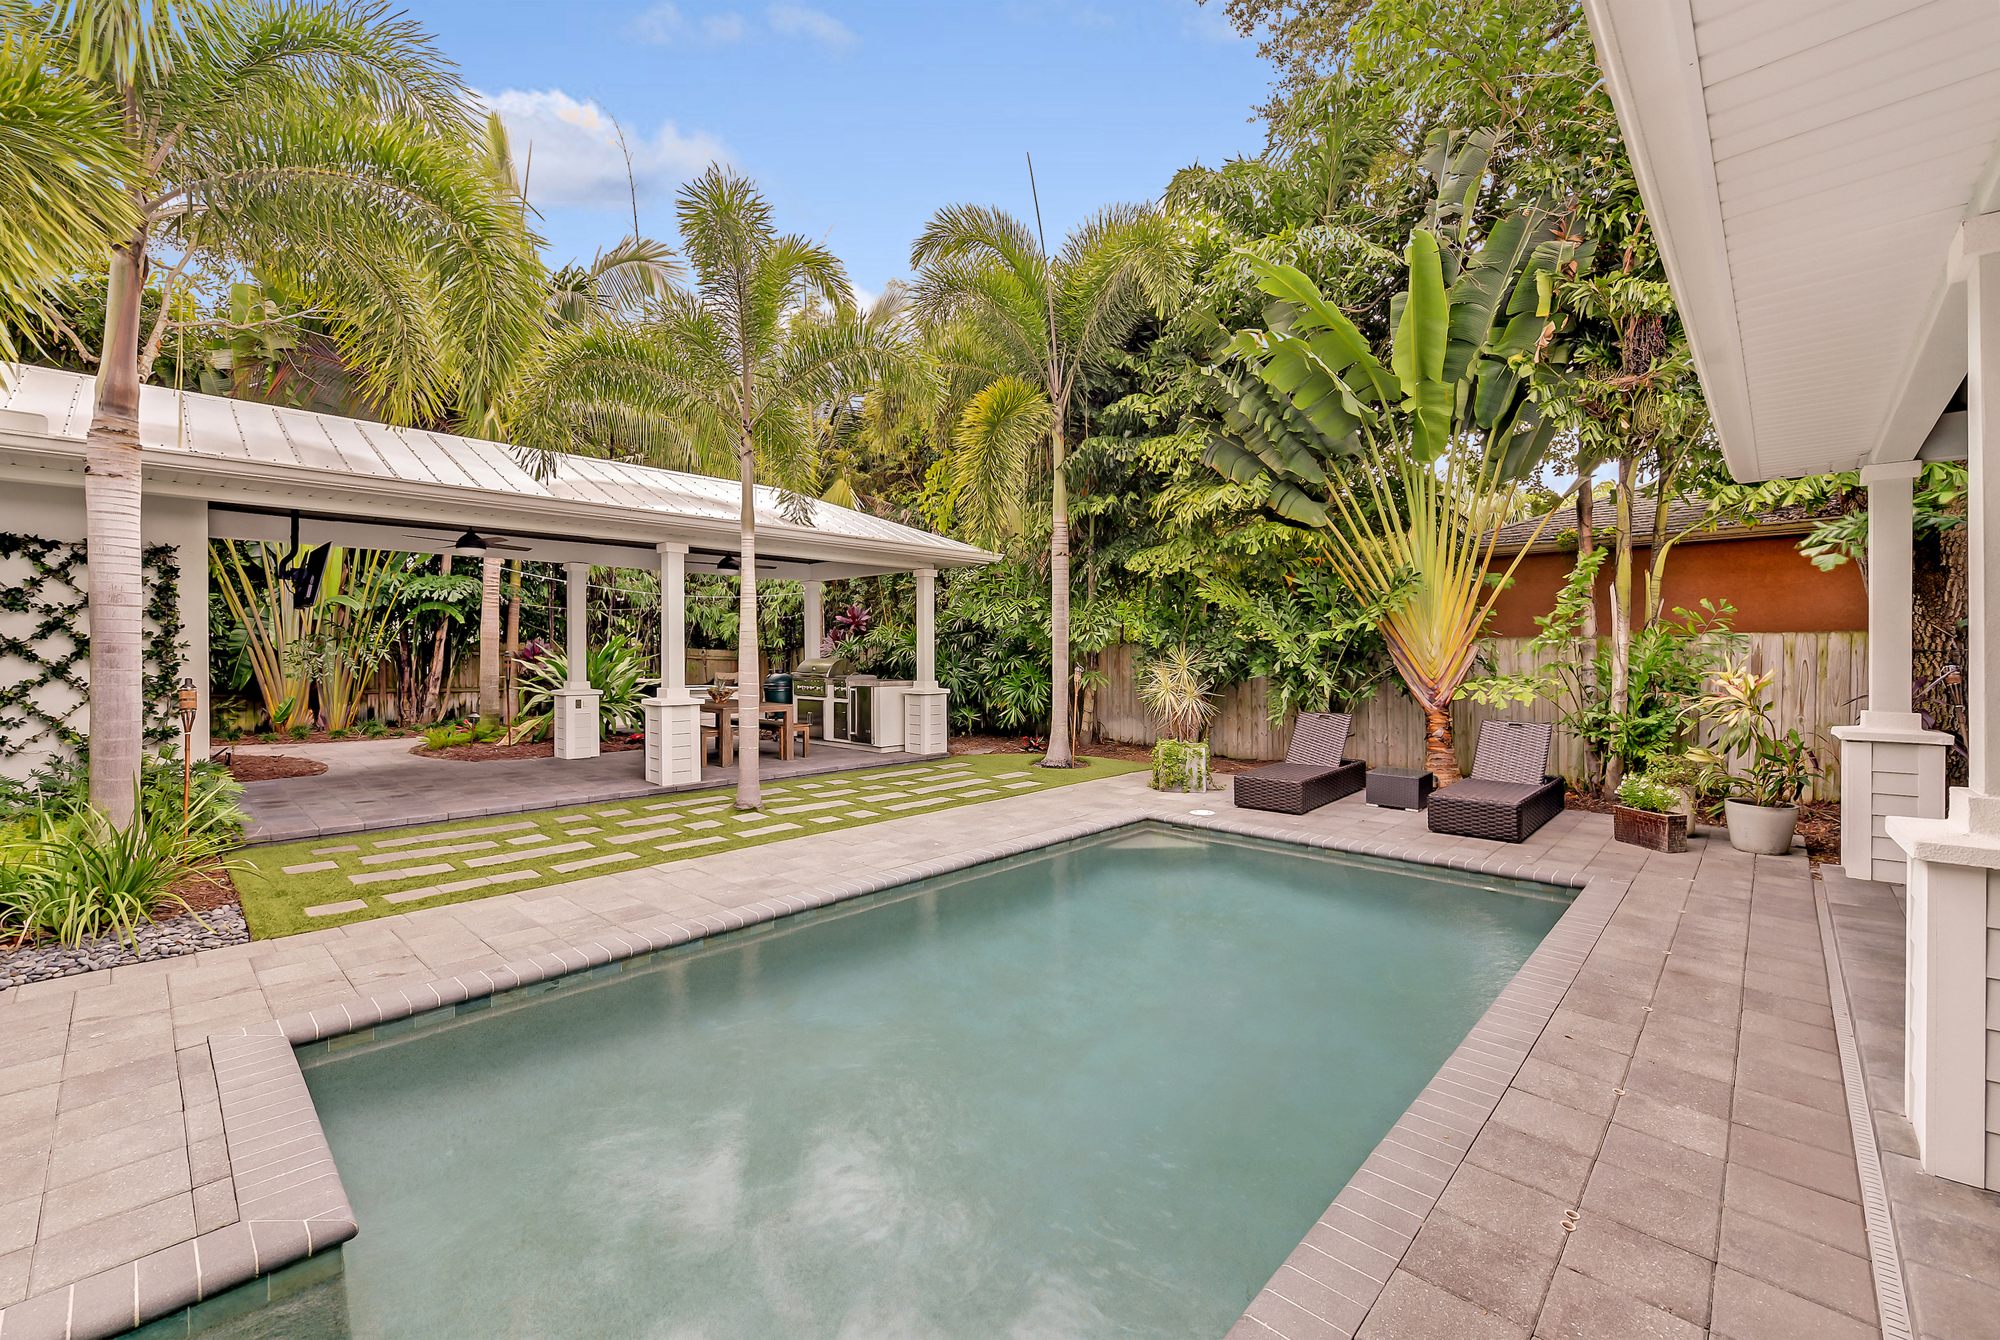 Courtesy. Judy Nimz of Michael Saunders & Co. represented the buyer and seller of 1815 Grove St. in Sarasota. After 1 day on the market, the property, with a pool and office, sold for 100% of its $1.2 million list price.